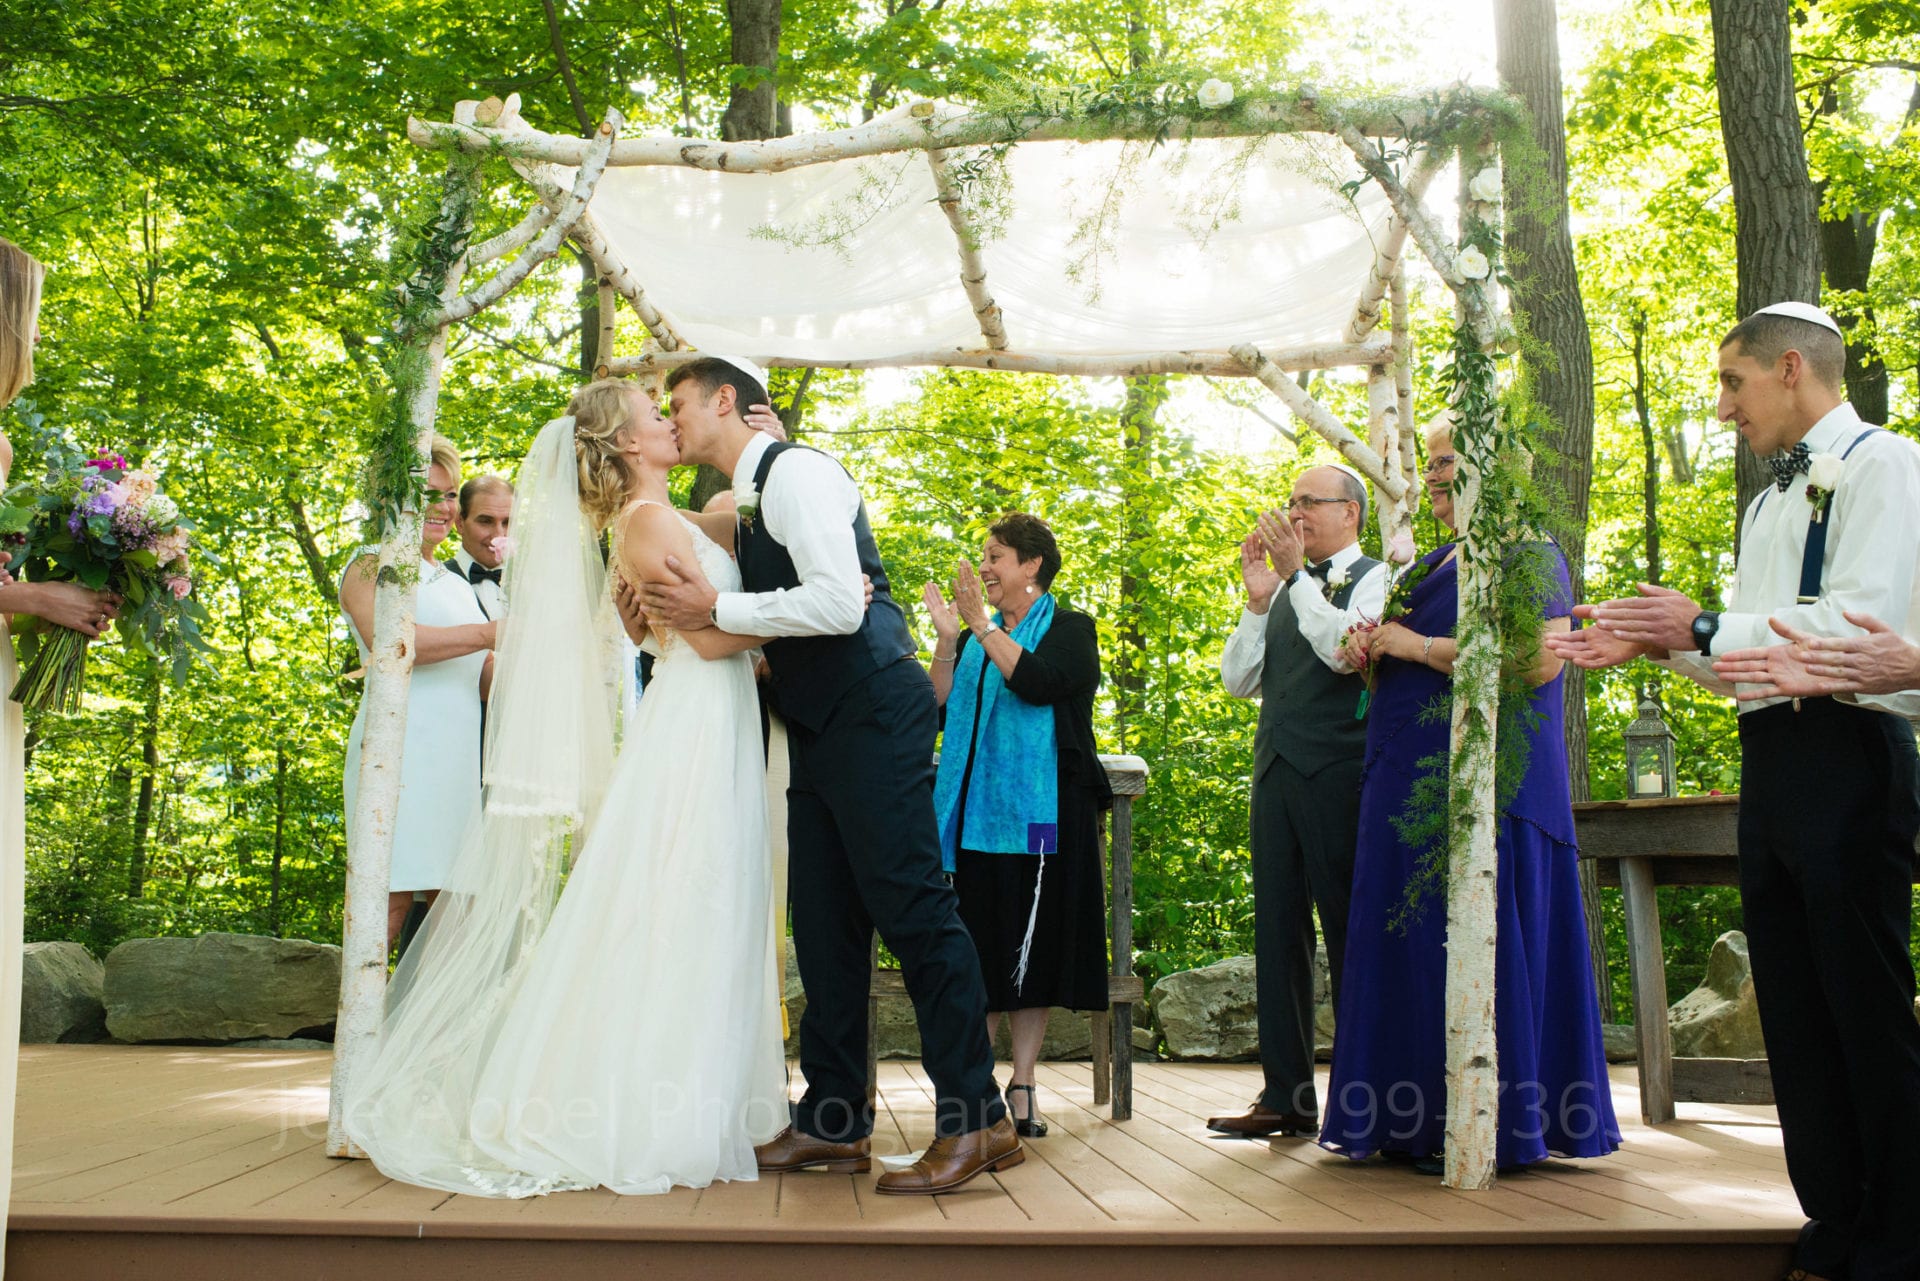 guests clap as the bride and groom kiss Seven Springs Weddings